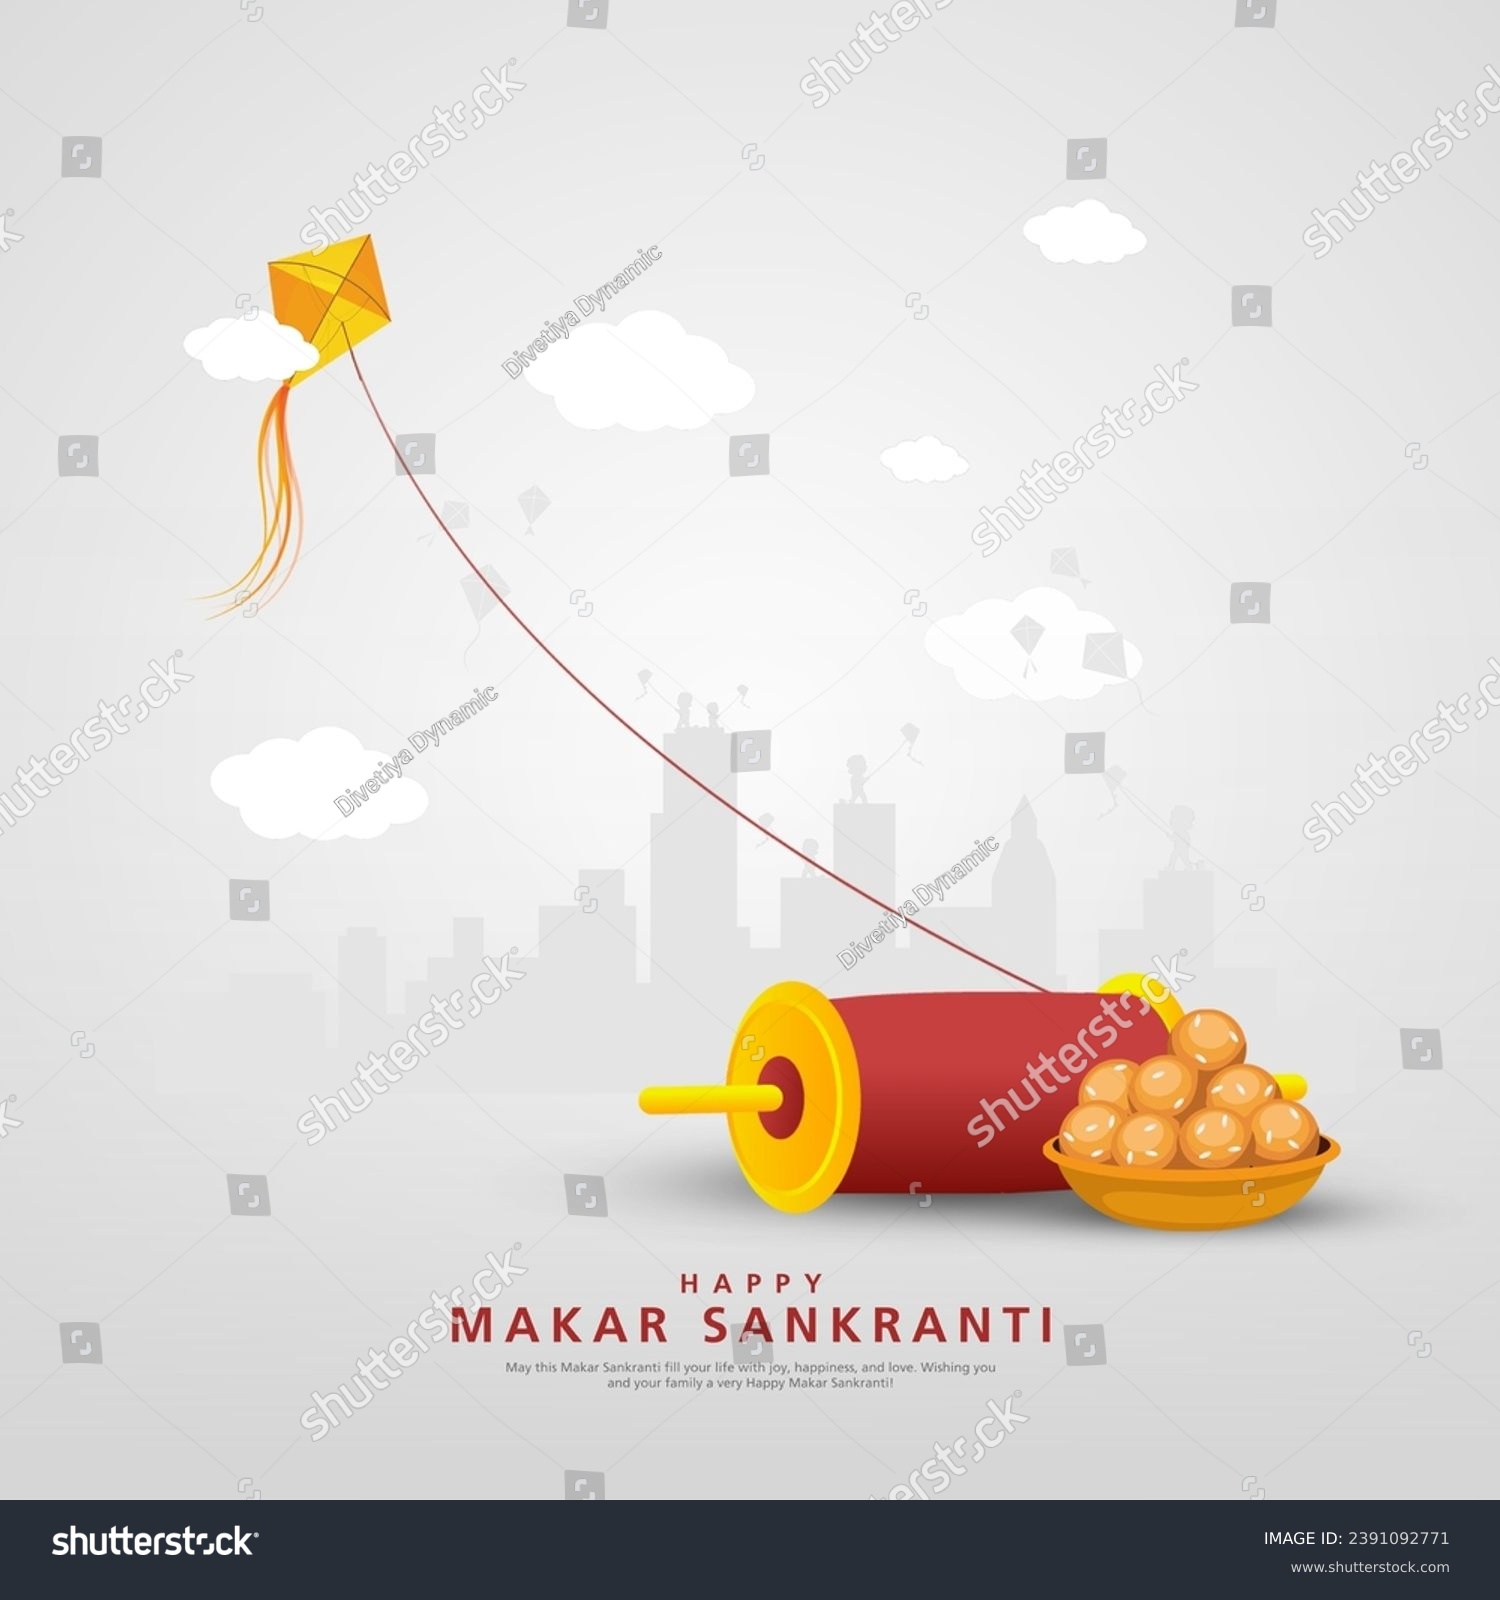 SVG of Indian festival Happy Makar Sankranti poster design with kites flying and string spool on cloudy sky. abstract vector illustration design. svg